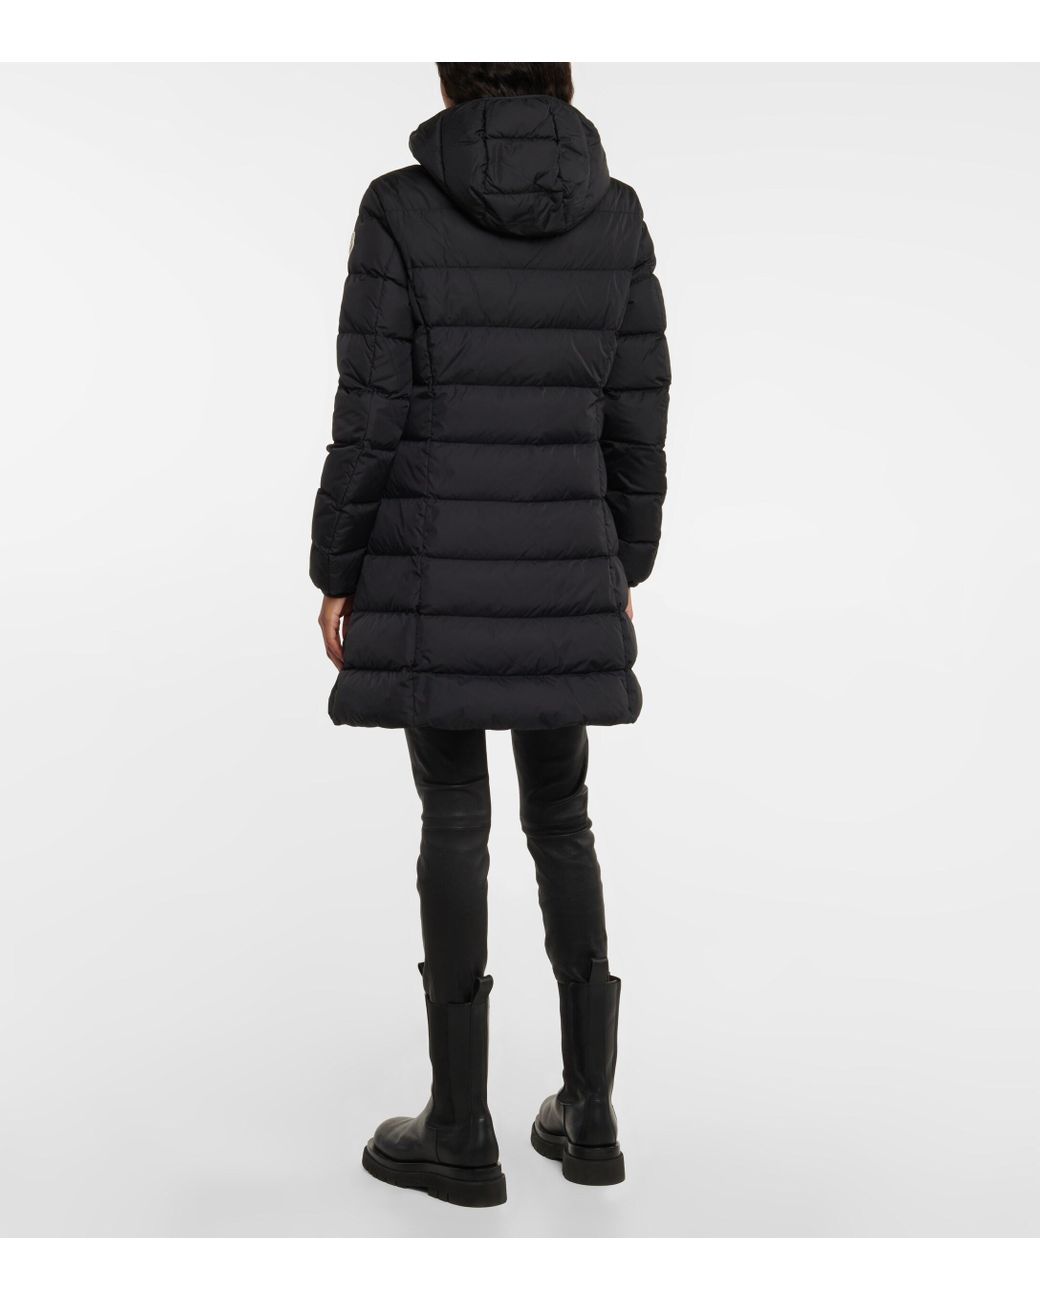 Moncler Gie Quilted Down Coat in Black | Lyst Canada